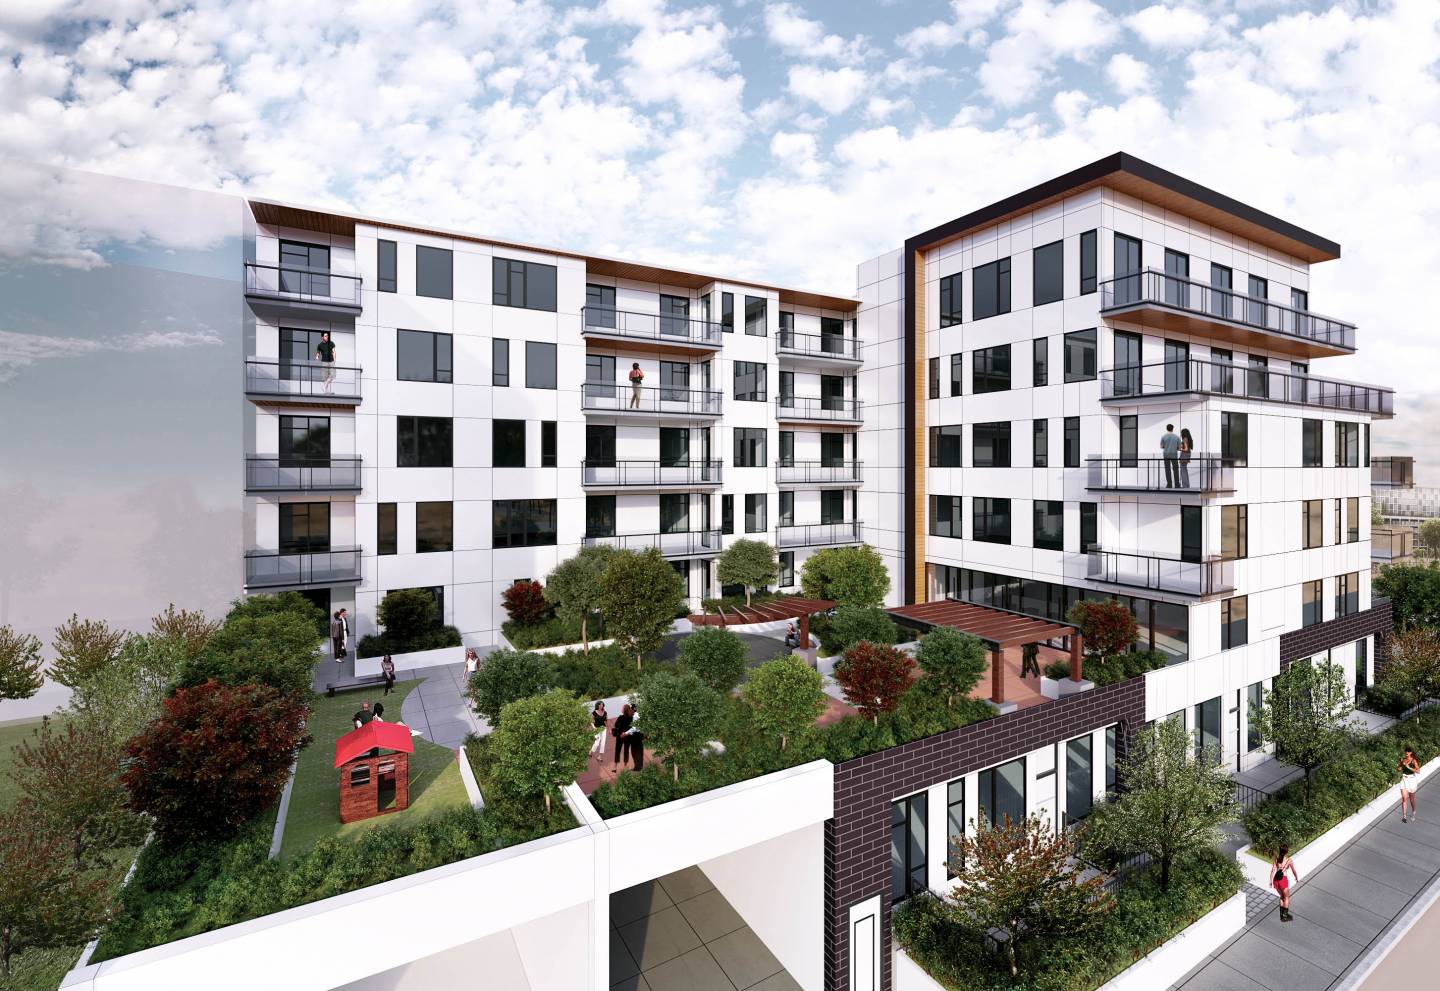 A large south-facing courtyard on Level 2 offers residents a renge of outdoor amenities.